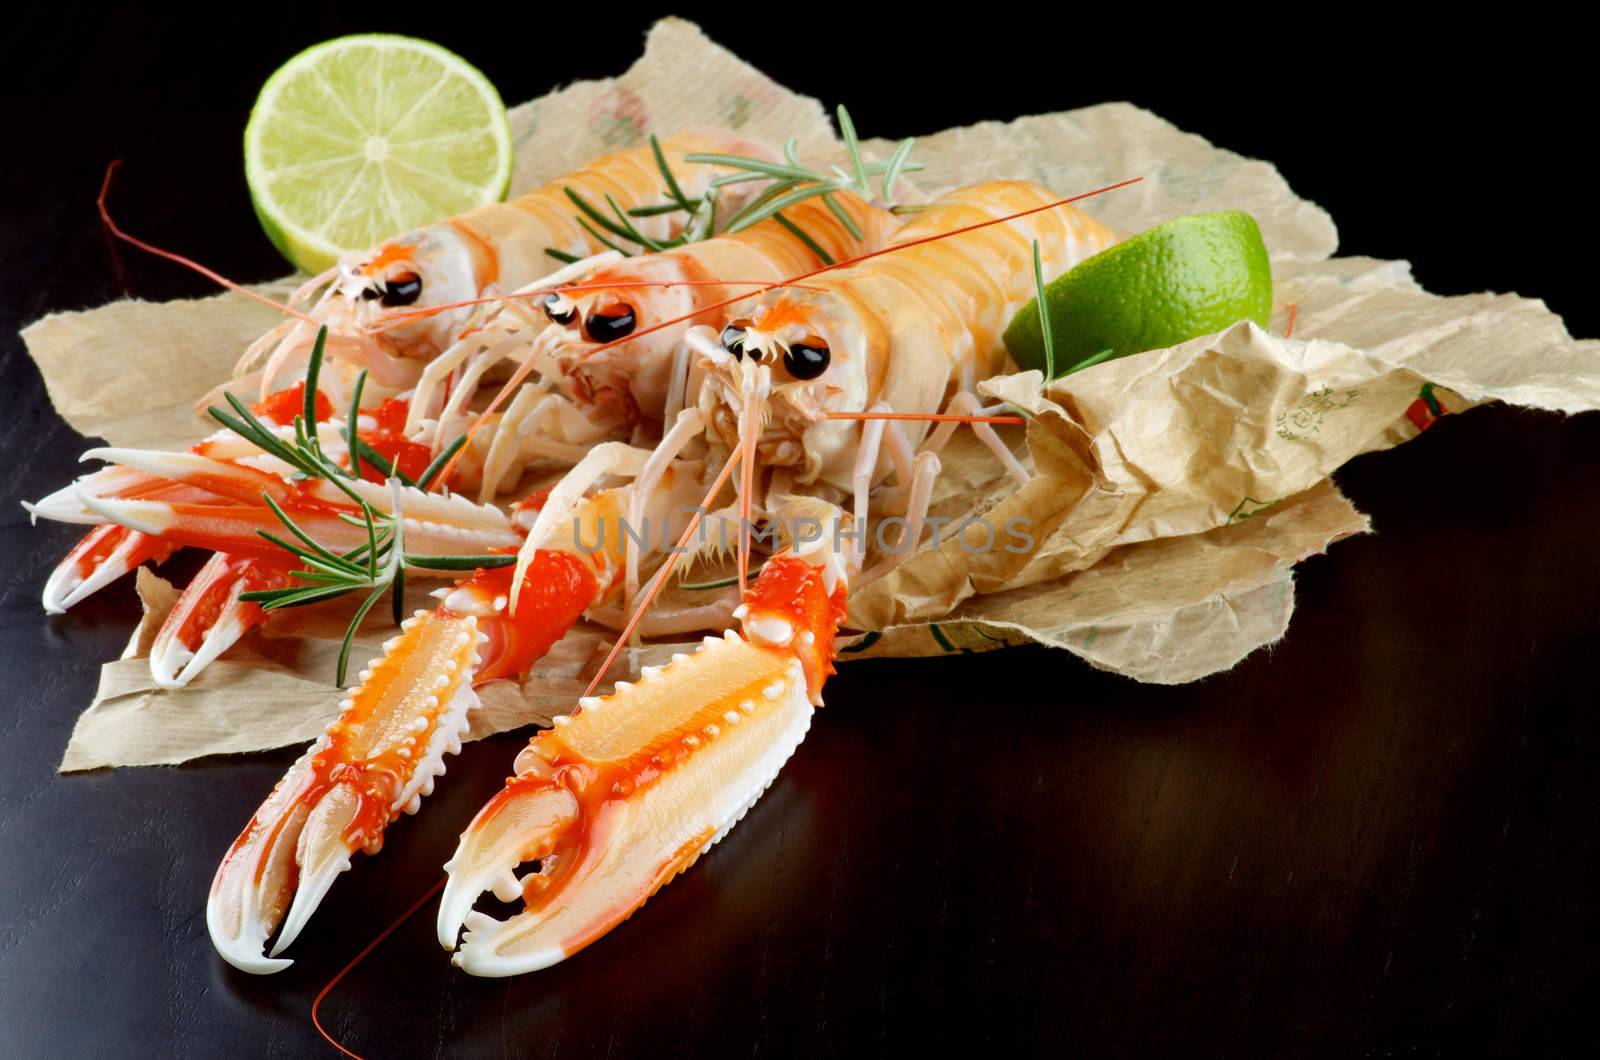 Delicious Raw Langoustines with Lime and Rosemary on Parchment Paper closeup on Dark background. Focus on Foreground